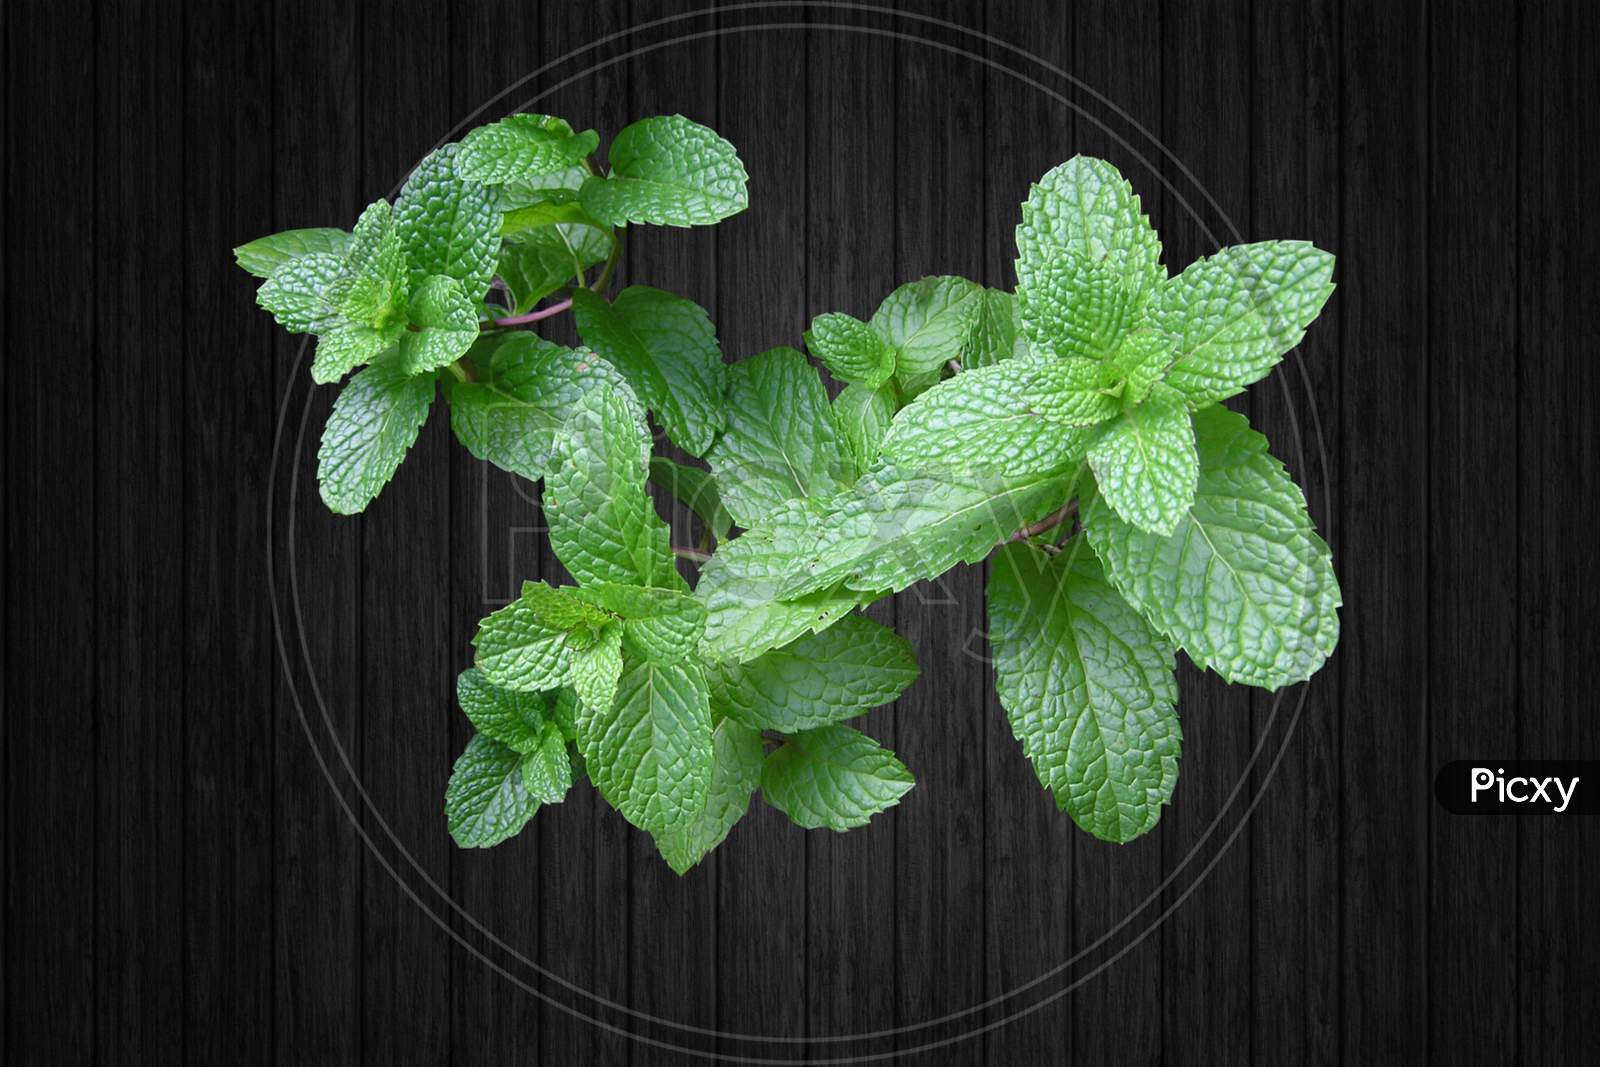 Fresh peppermint leaf on wooden background.